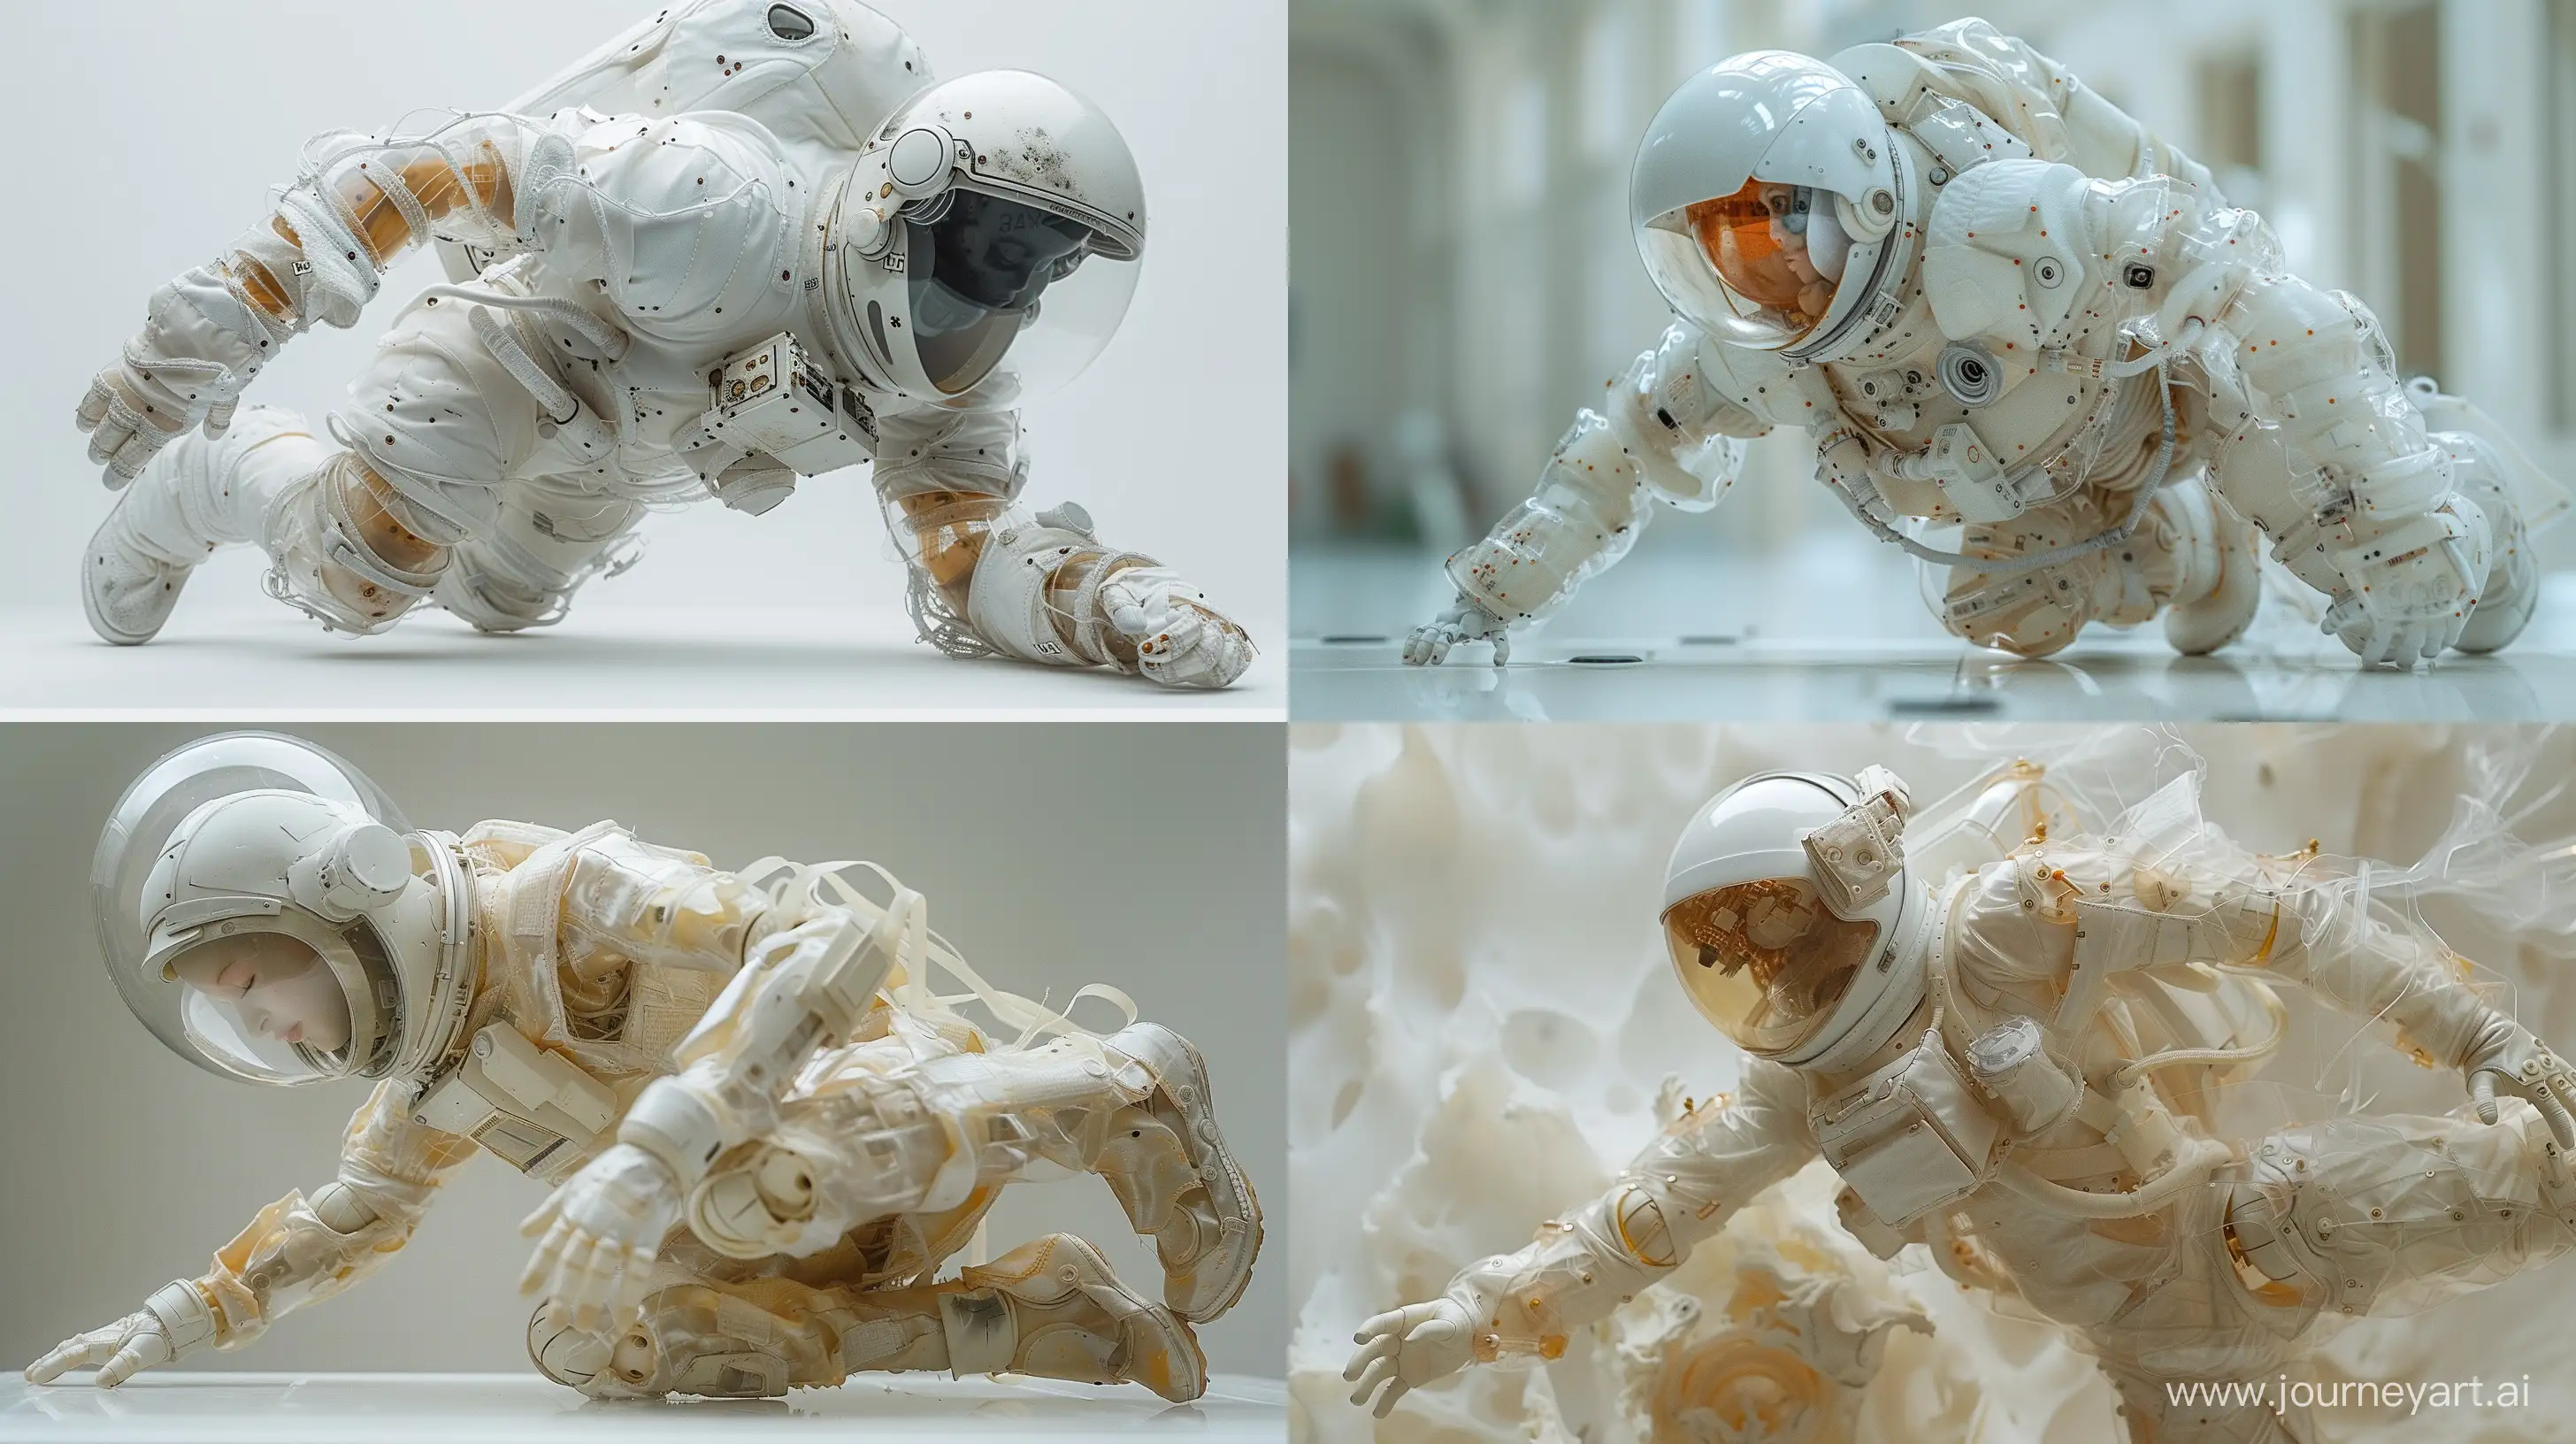 Hyperrealistic-Mechanical-Astronaut-Photoshoot-with-Transparent-BallJointed-Doll-in-Dynamic-Pose